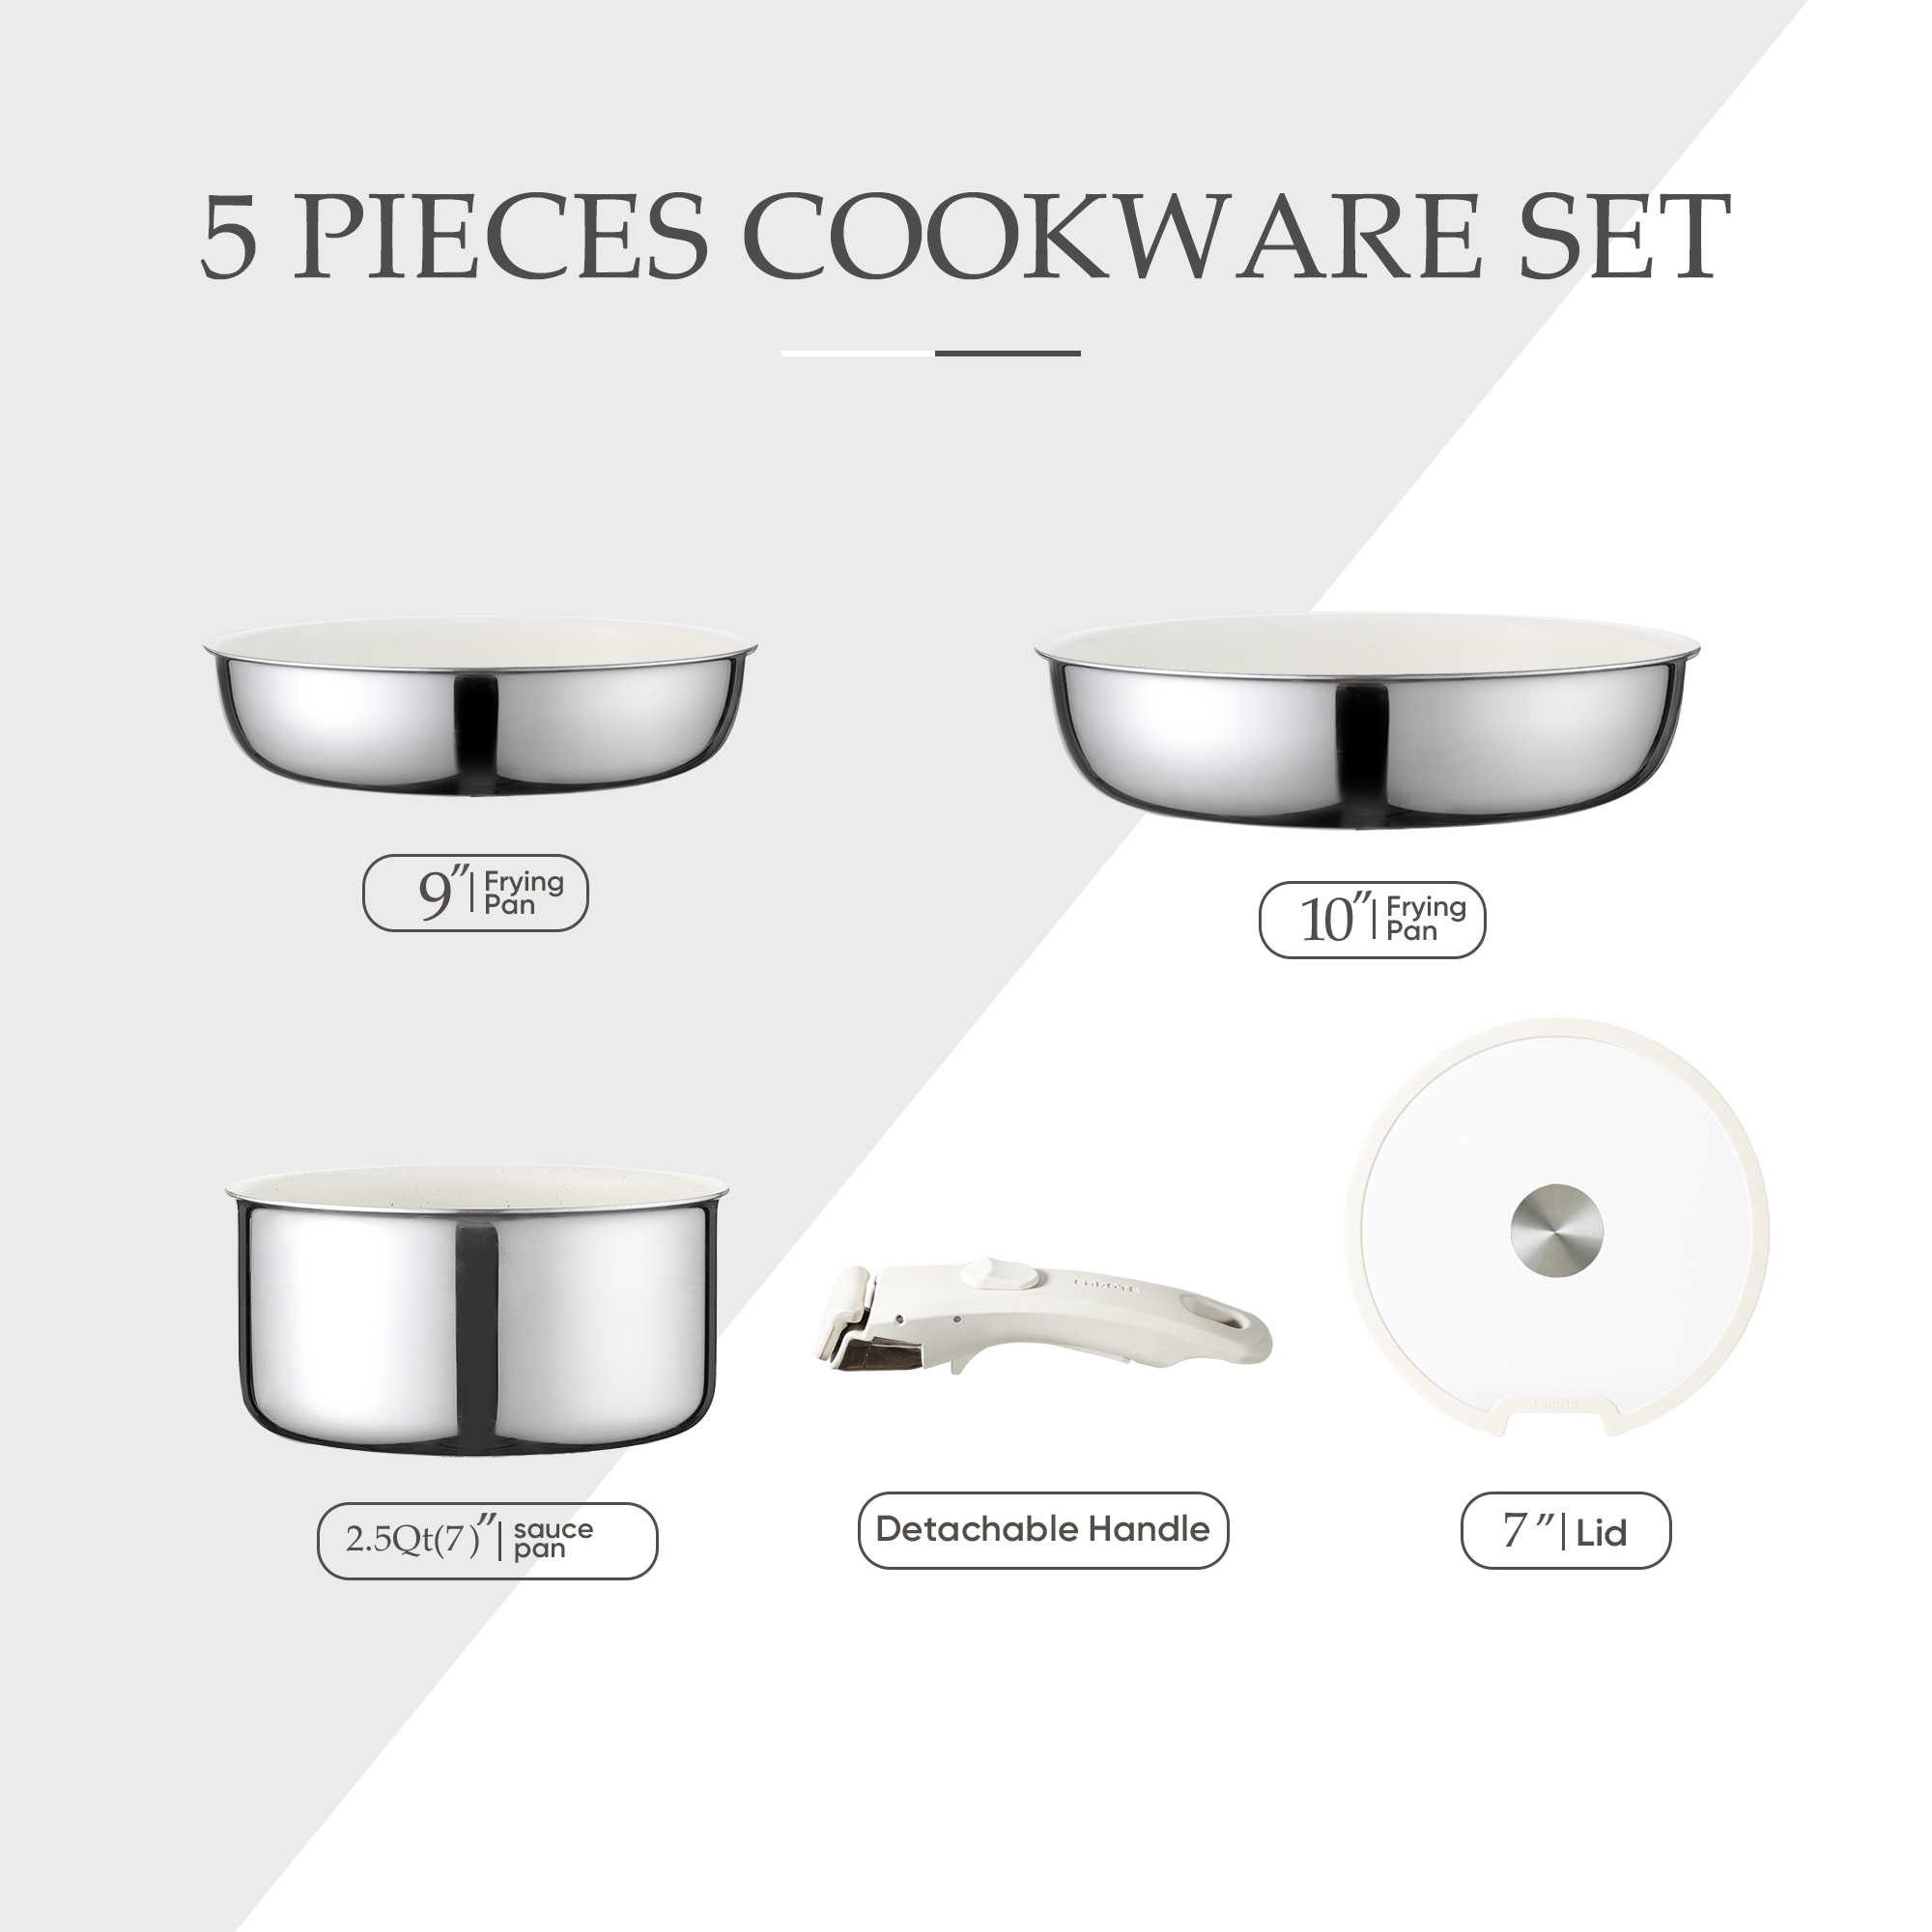 CAROTE 5pcs Stainless Steel Cookware Set, Non Stick Pots and Pans Set with Removable/Detachable Handle, Oven/Dishwasher Safe, RV Cookware, Frying Pan Set